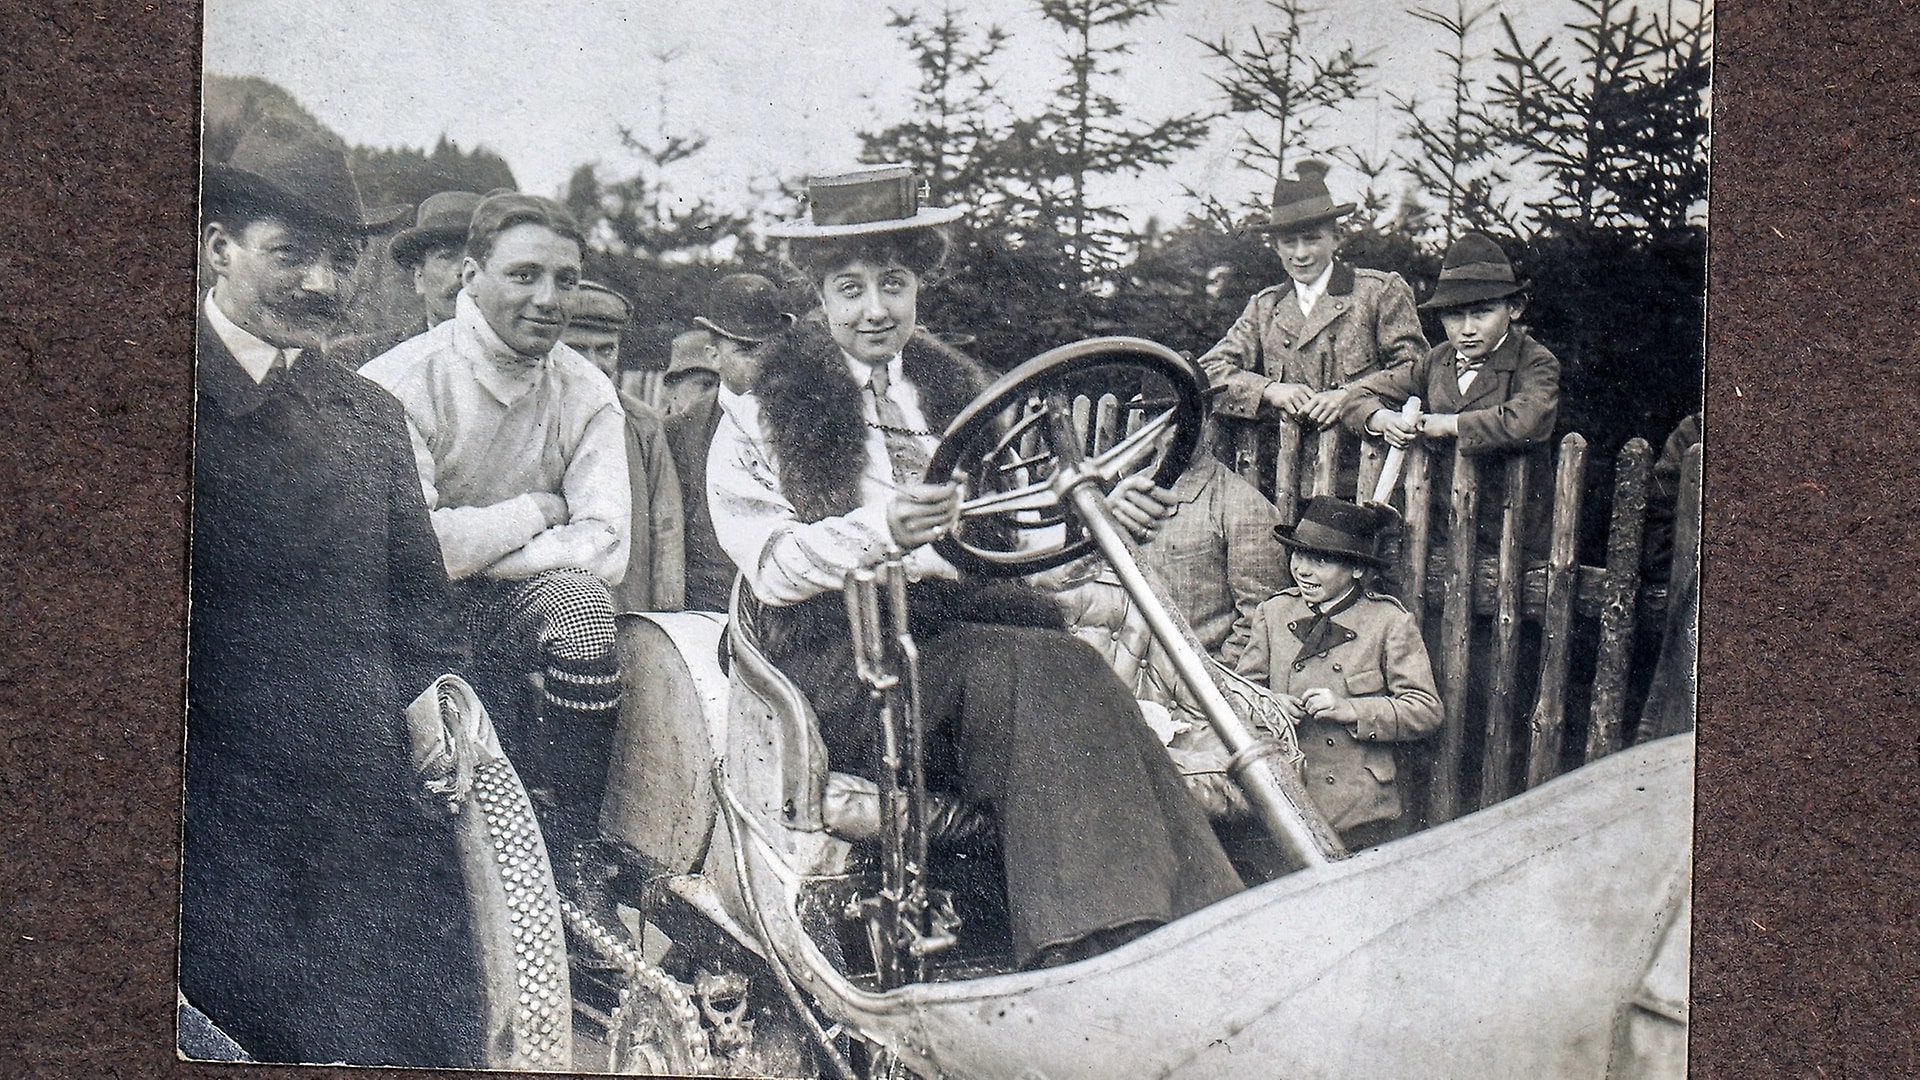 Mercédès Jellinek in a Mercedes racing car, photographed around 1906.